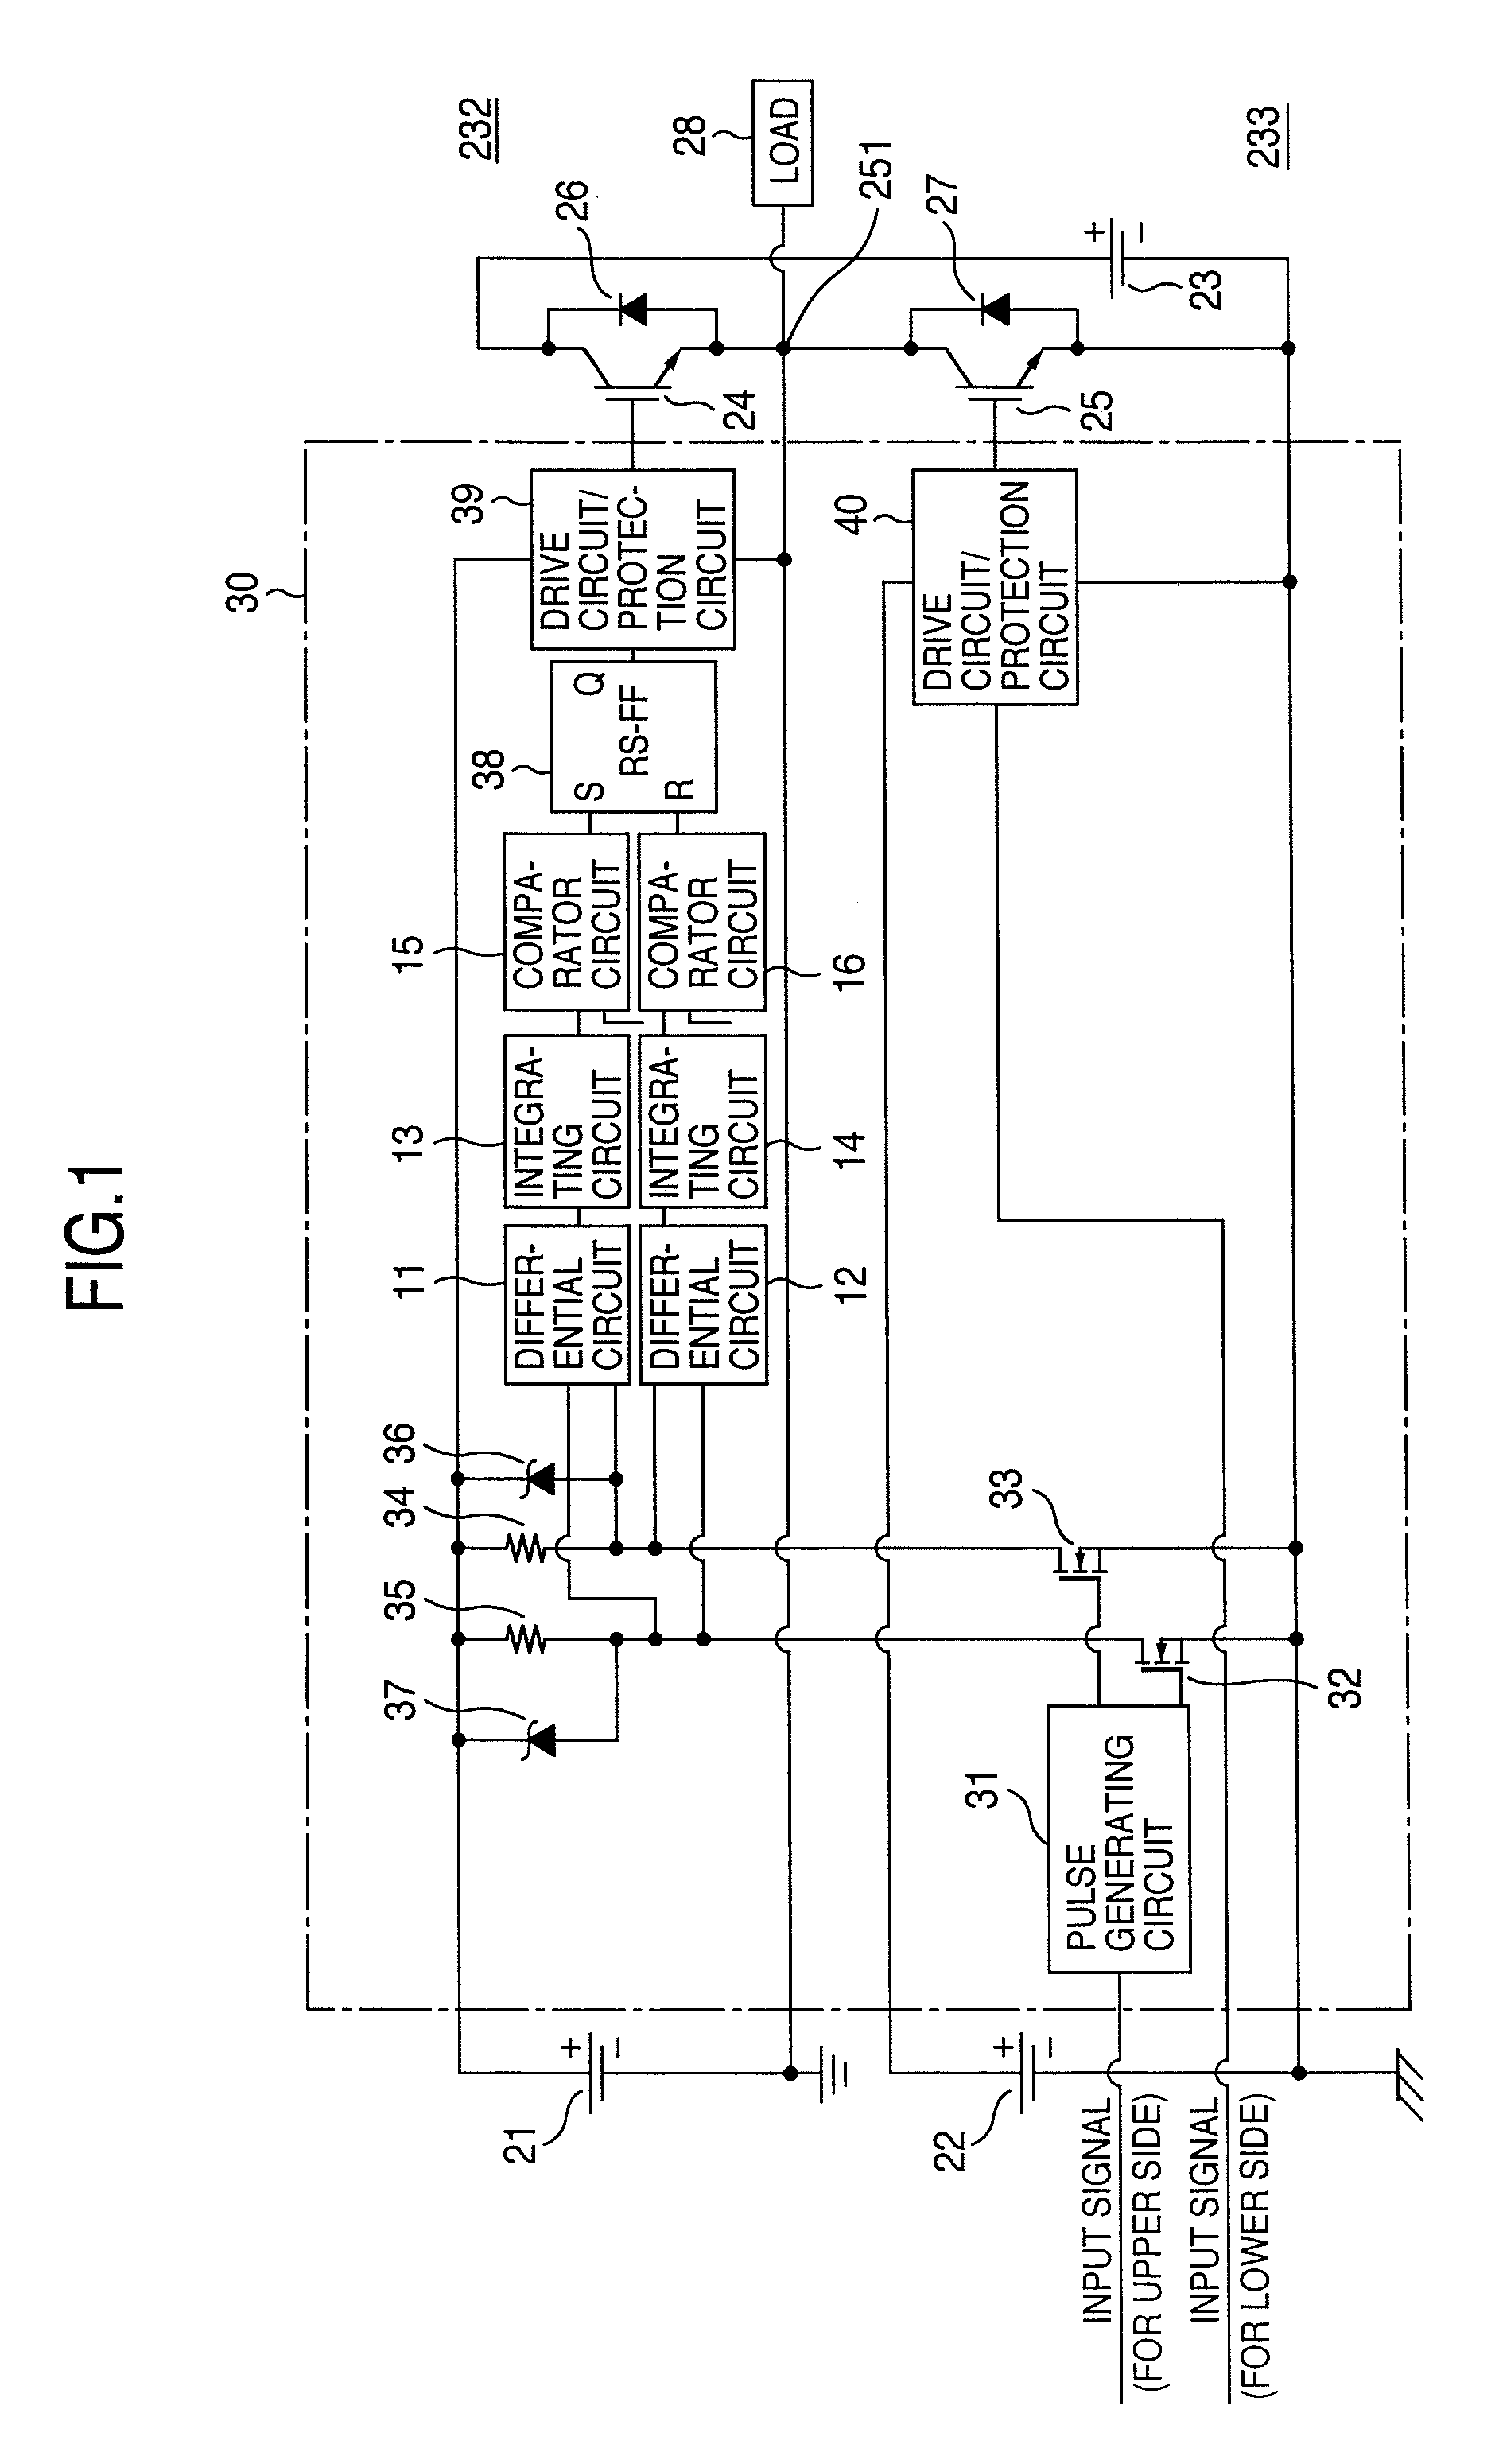 Driving circuit for switching elements